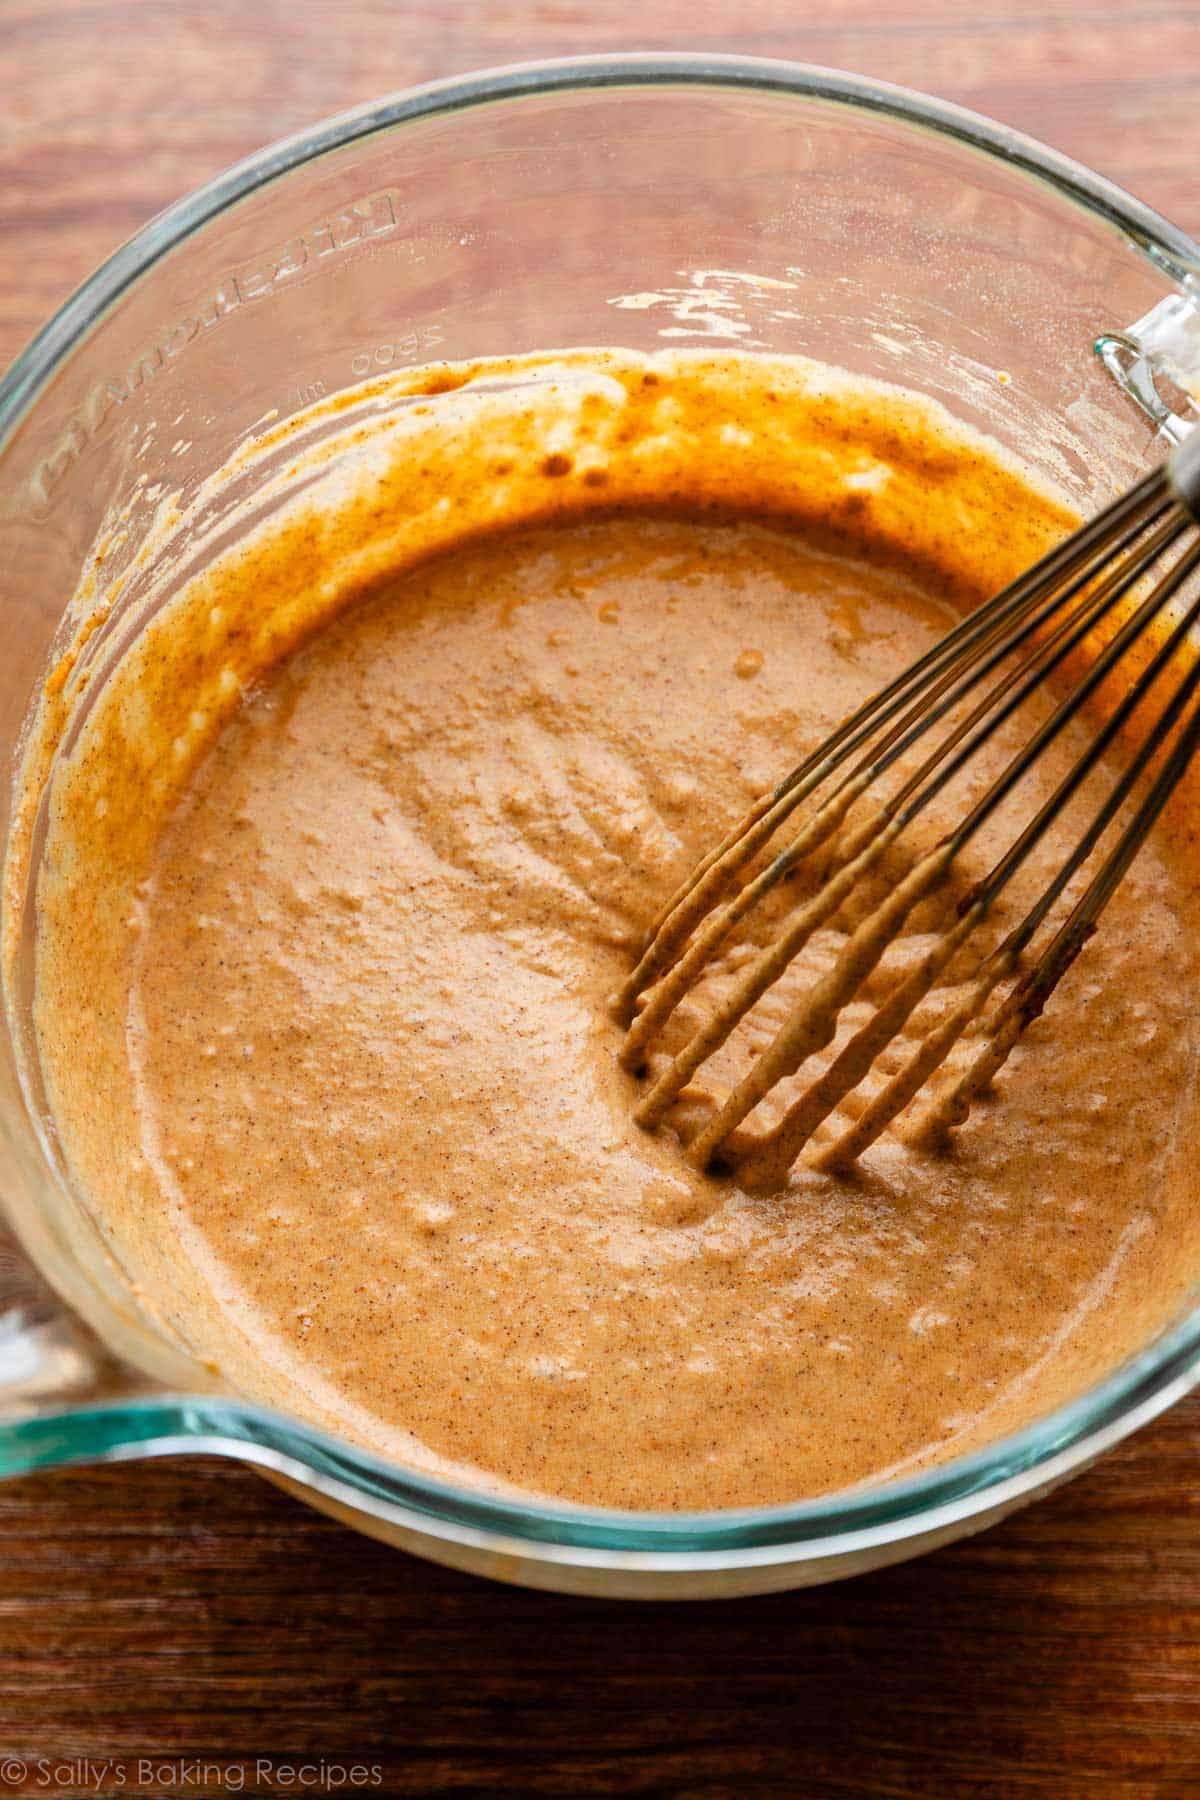 pumpkin batter in glass bowl with whisk on wooden surface.